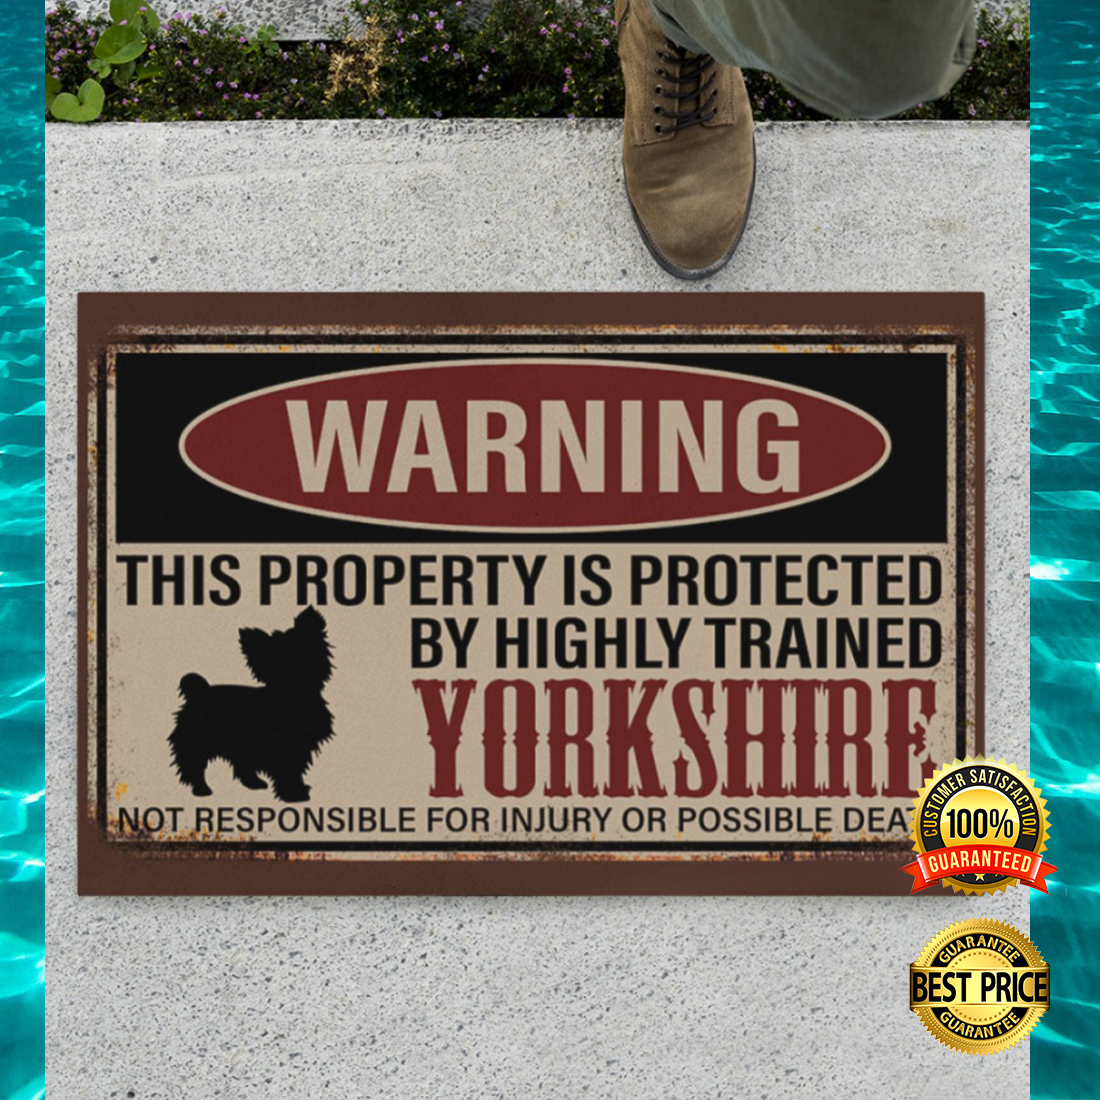 Warning this property is protected by highly trained yorkshire doormat 4